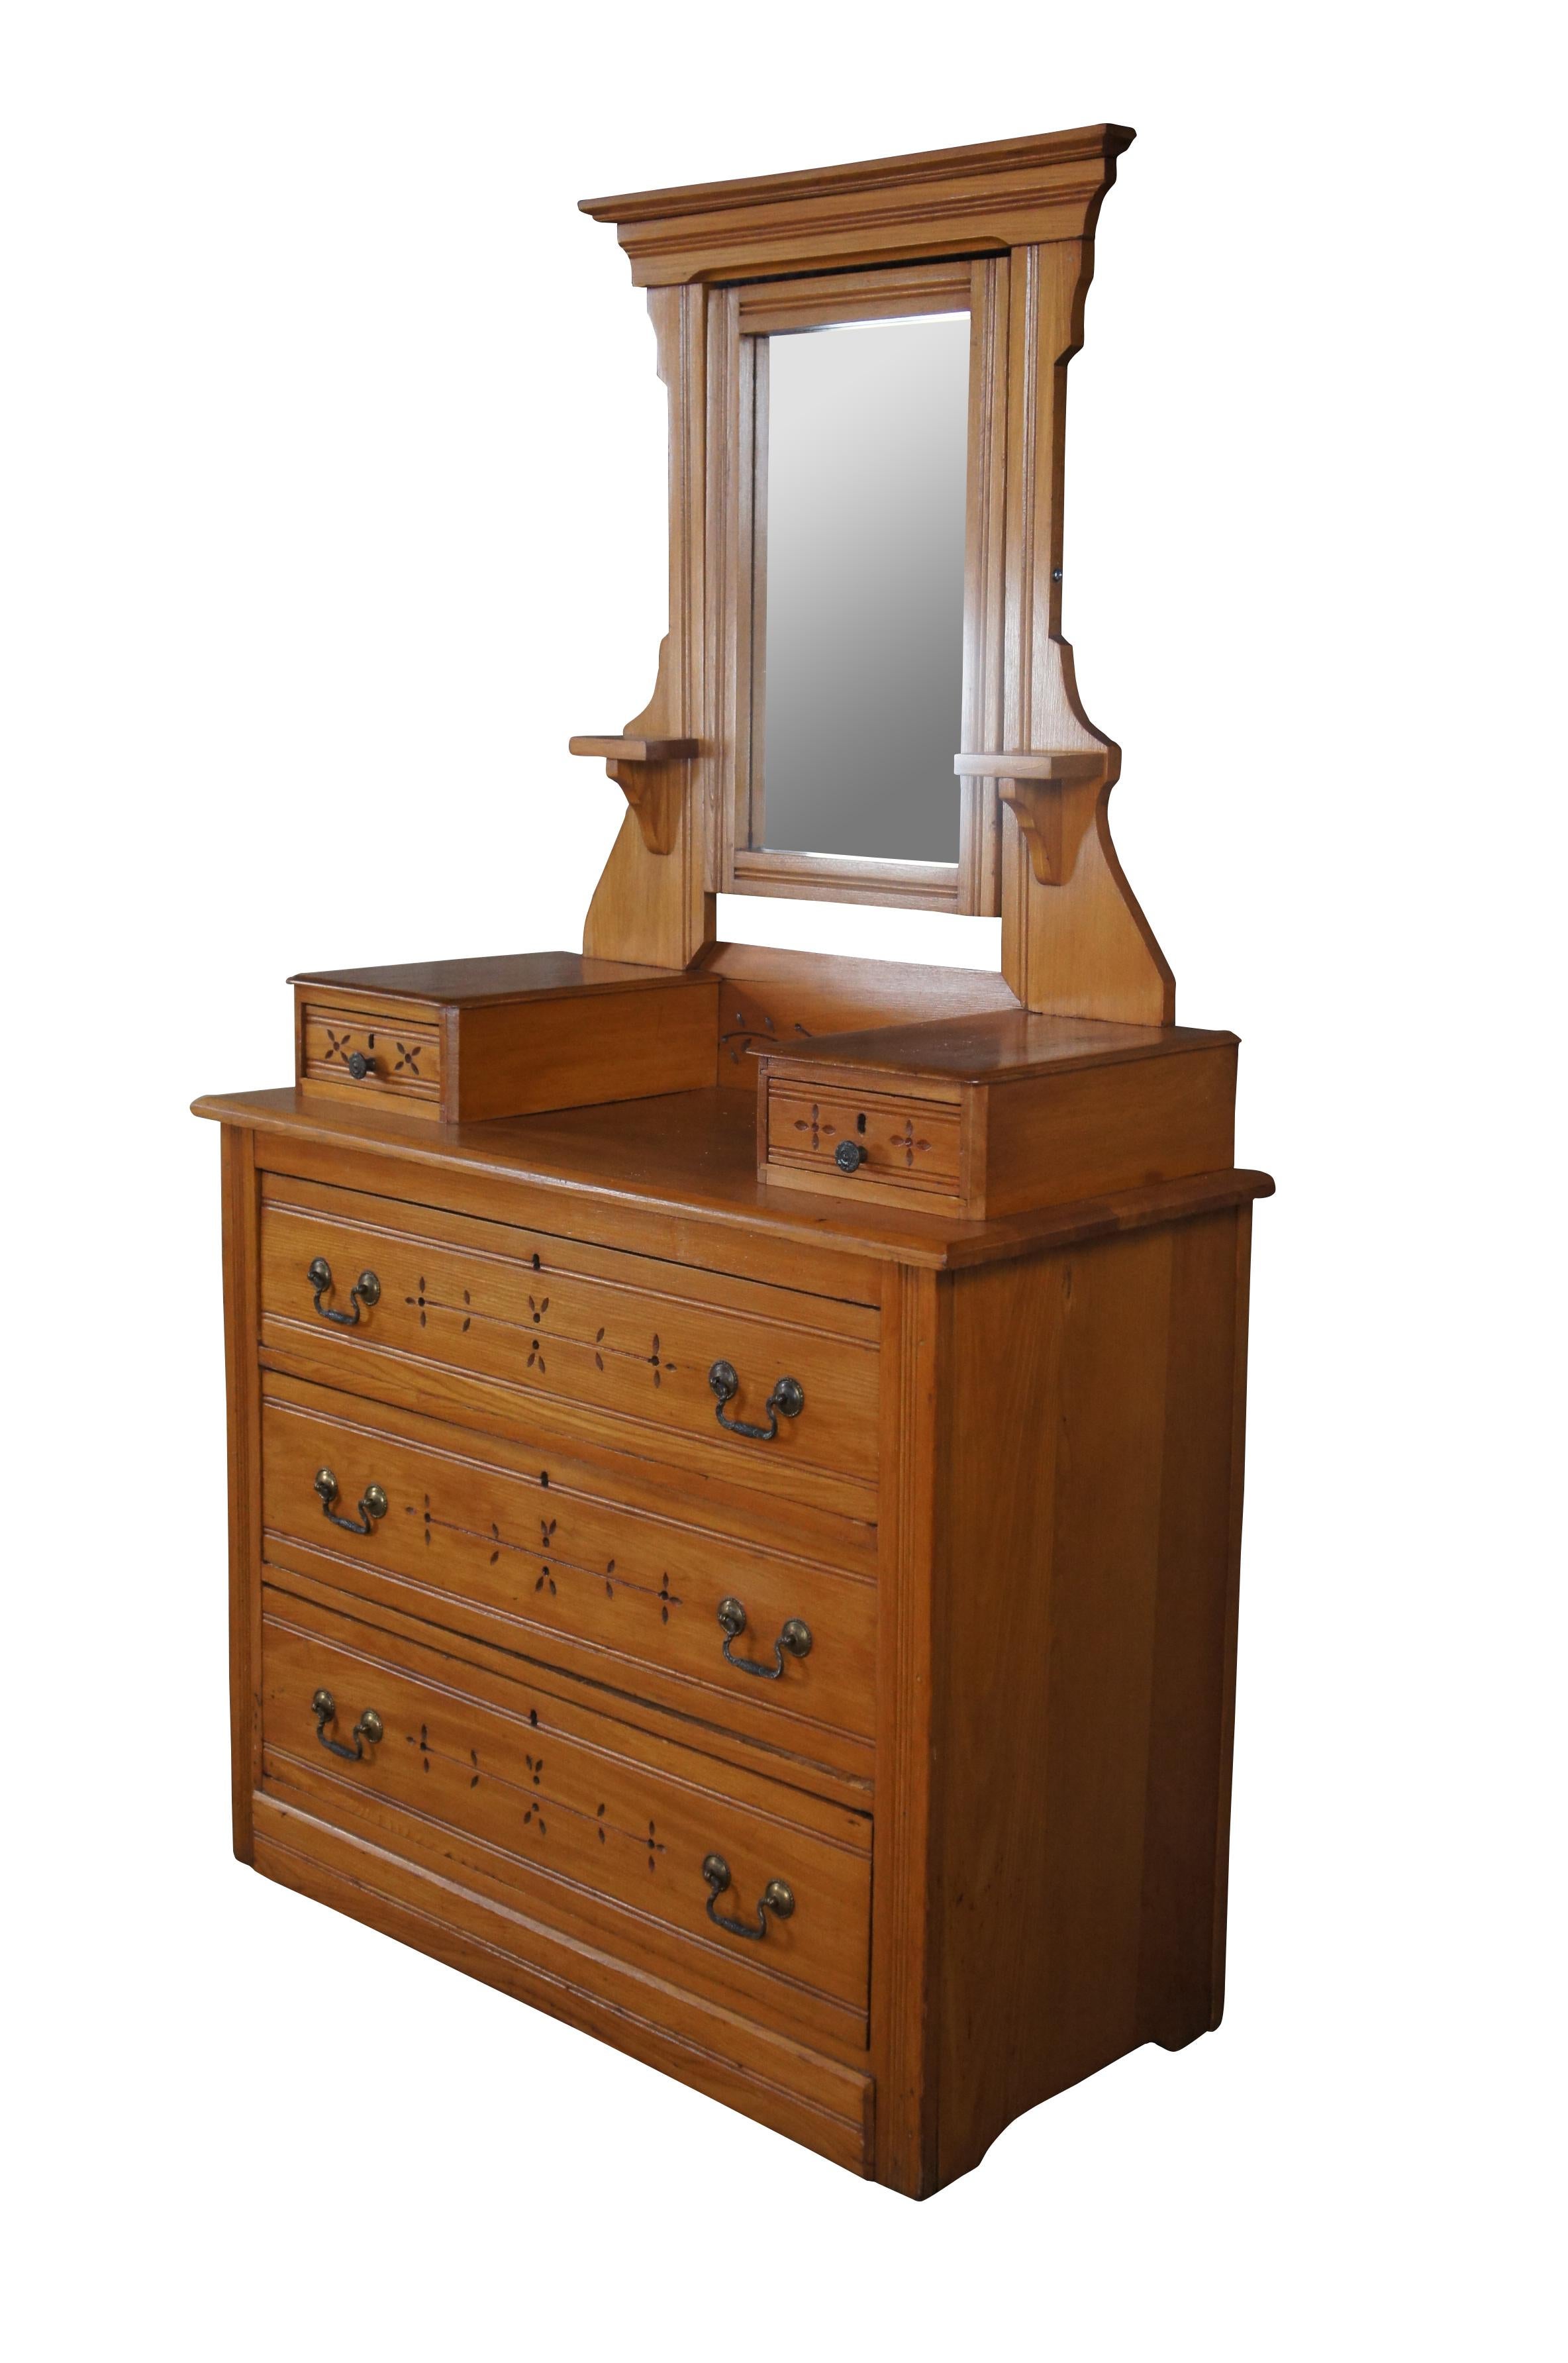 A late Victorian stepback dresser and mirror, circa 1900s. Made from pine with carved foliate detail. Features three large lower dovetailed drawers and two upper glovebox or handkerchief drawers. Features a swivel mirror along the back flanked by